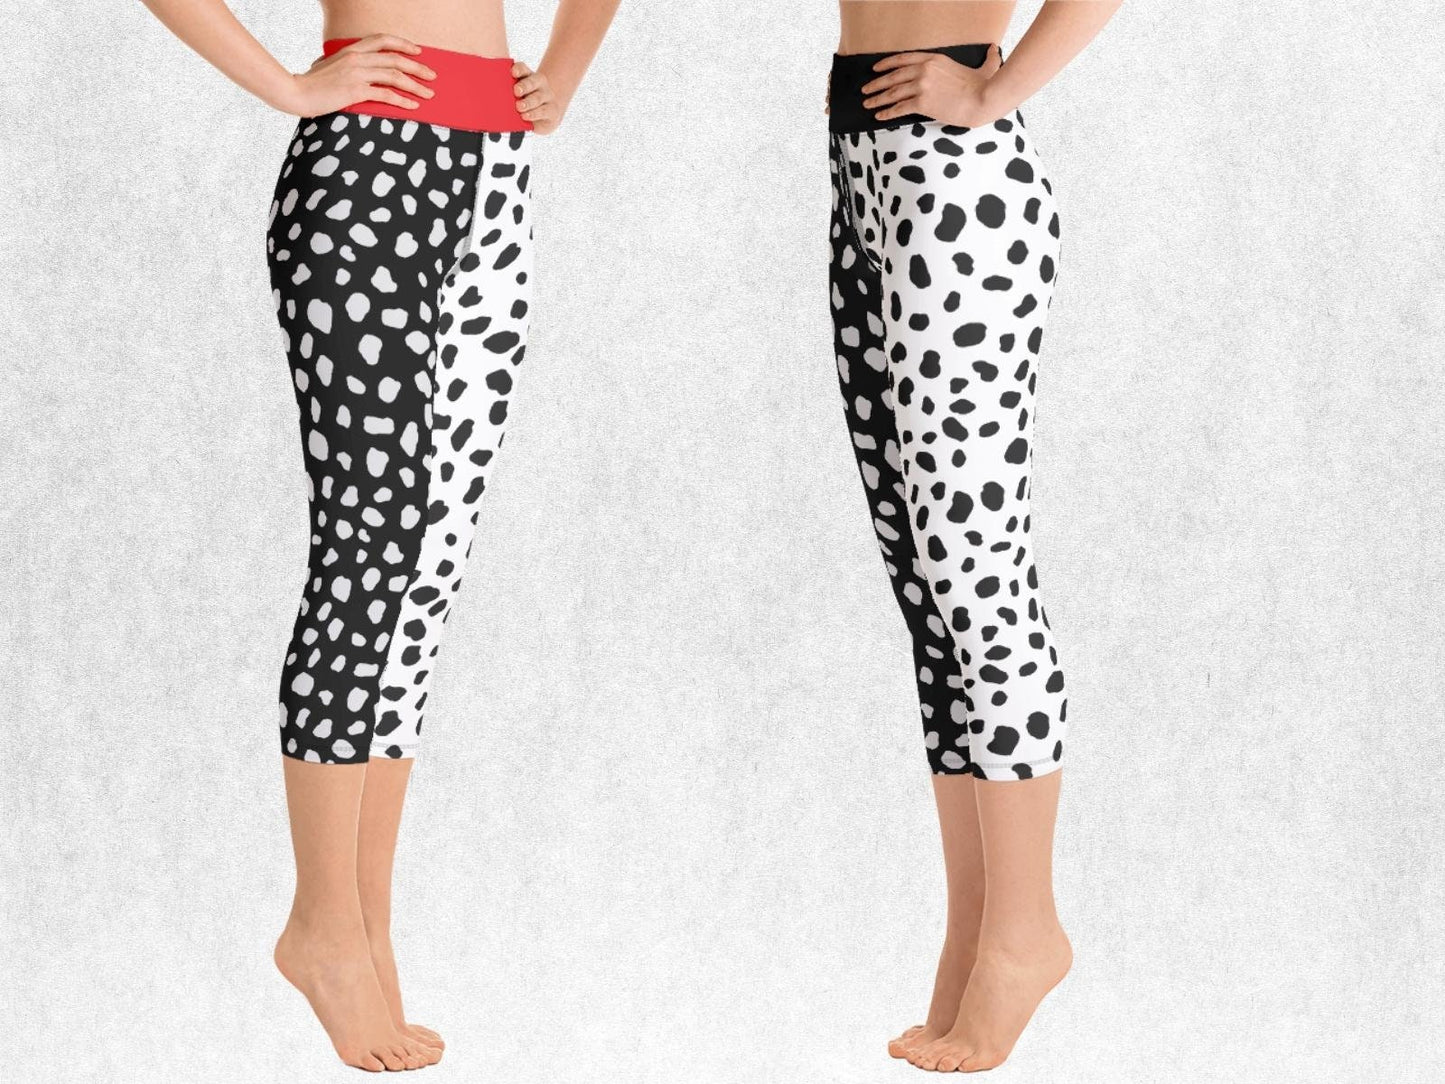 Cruel lady Yoga Capris, Woman Cosplay, Dalmatians, Adult Halloween Costume, Gift for Her, Cosplay Outfit, Gift for Daughter